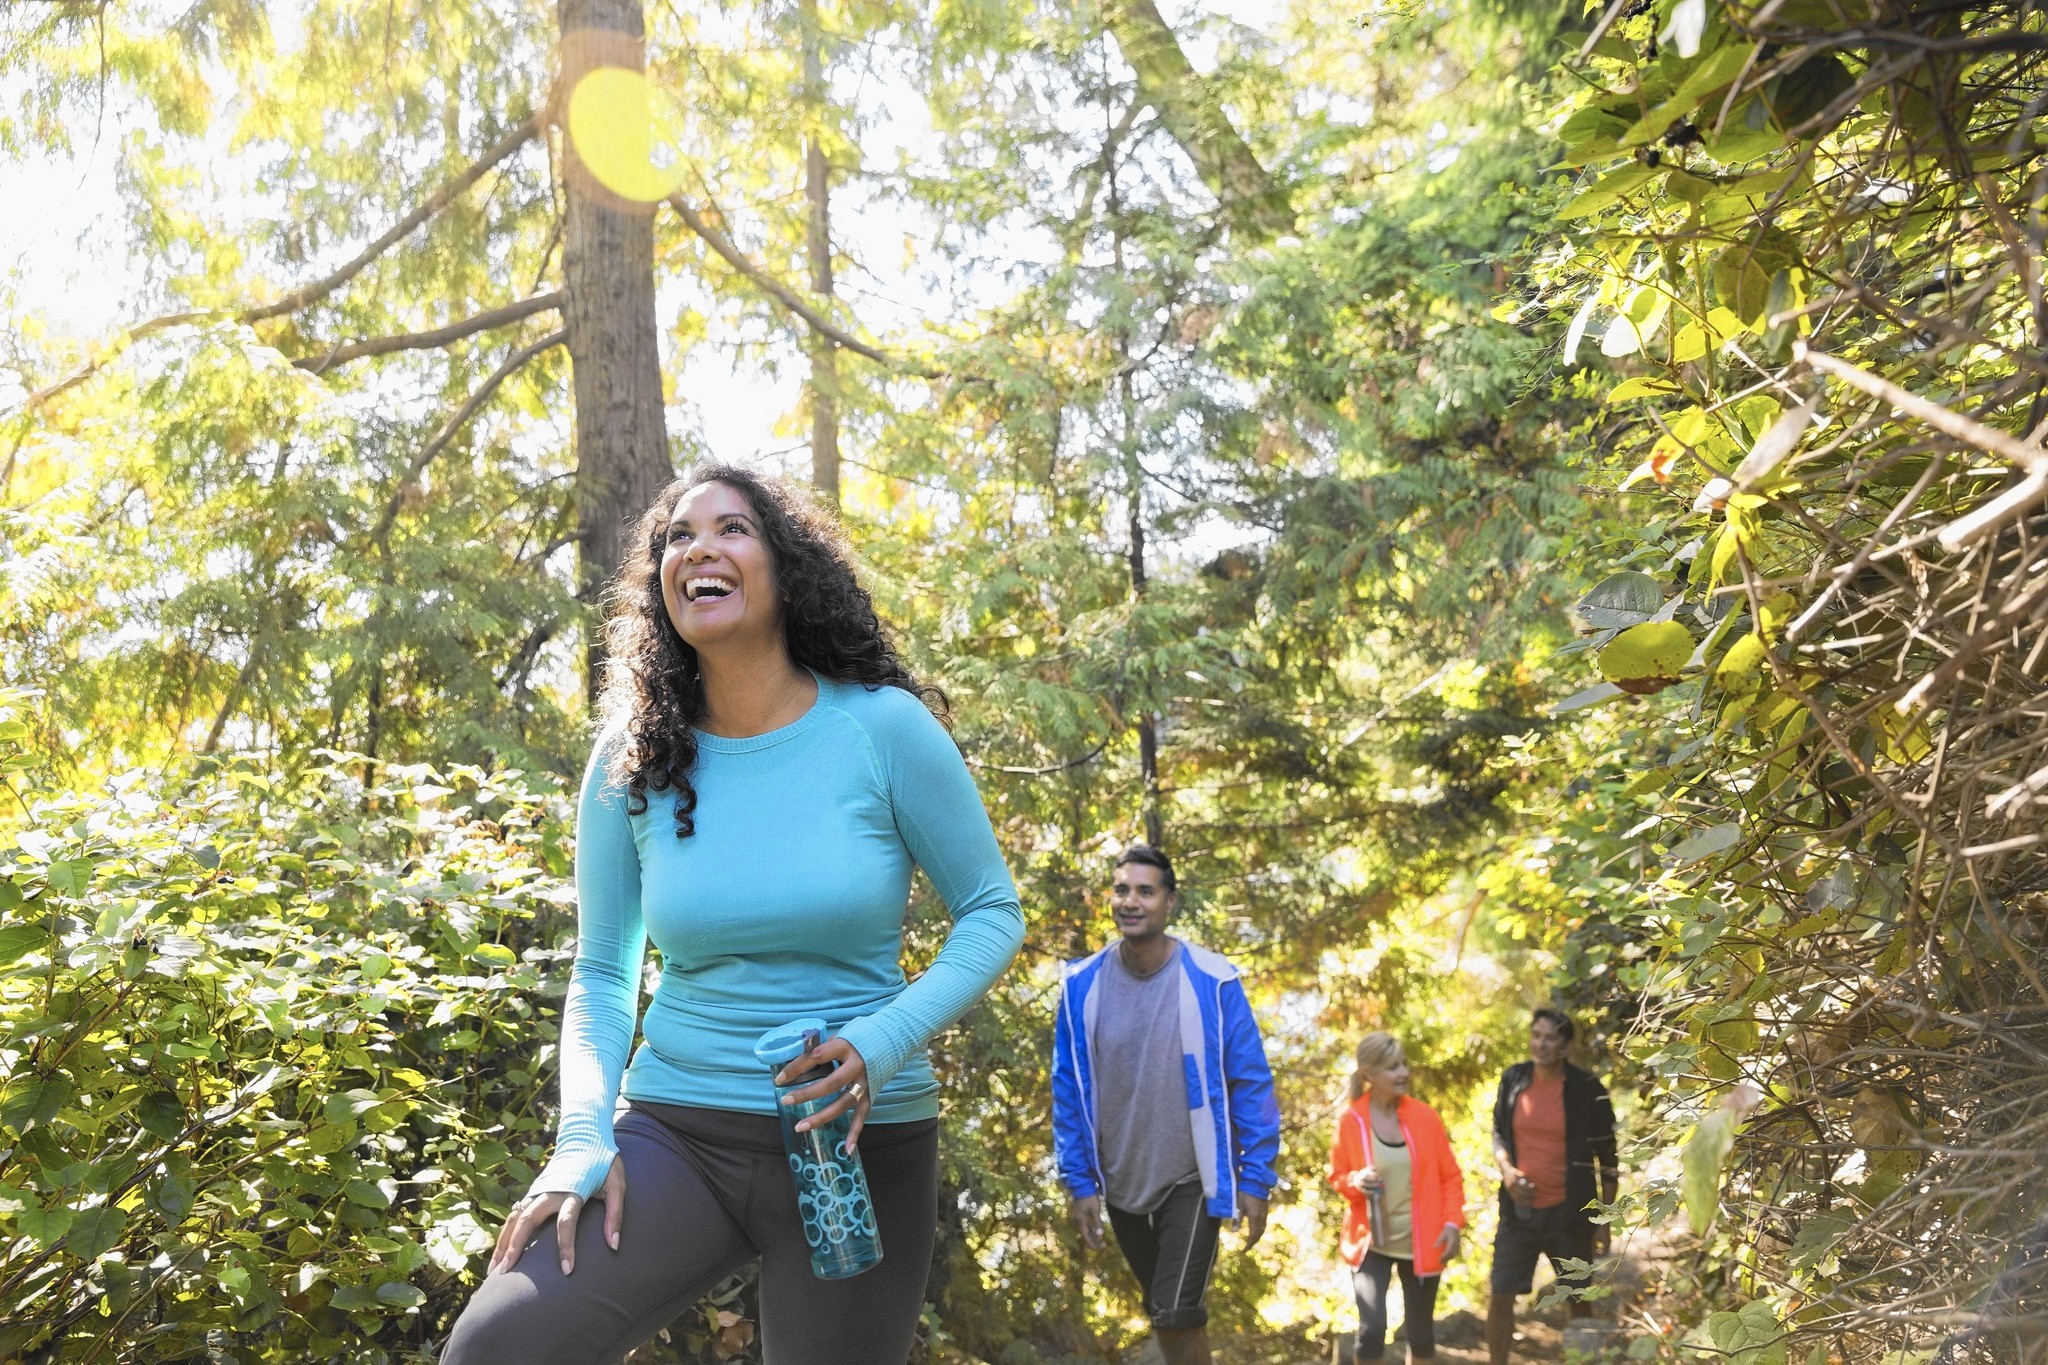 10 Benefits of Walking, Plus Safety Tips and More